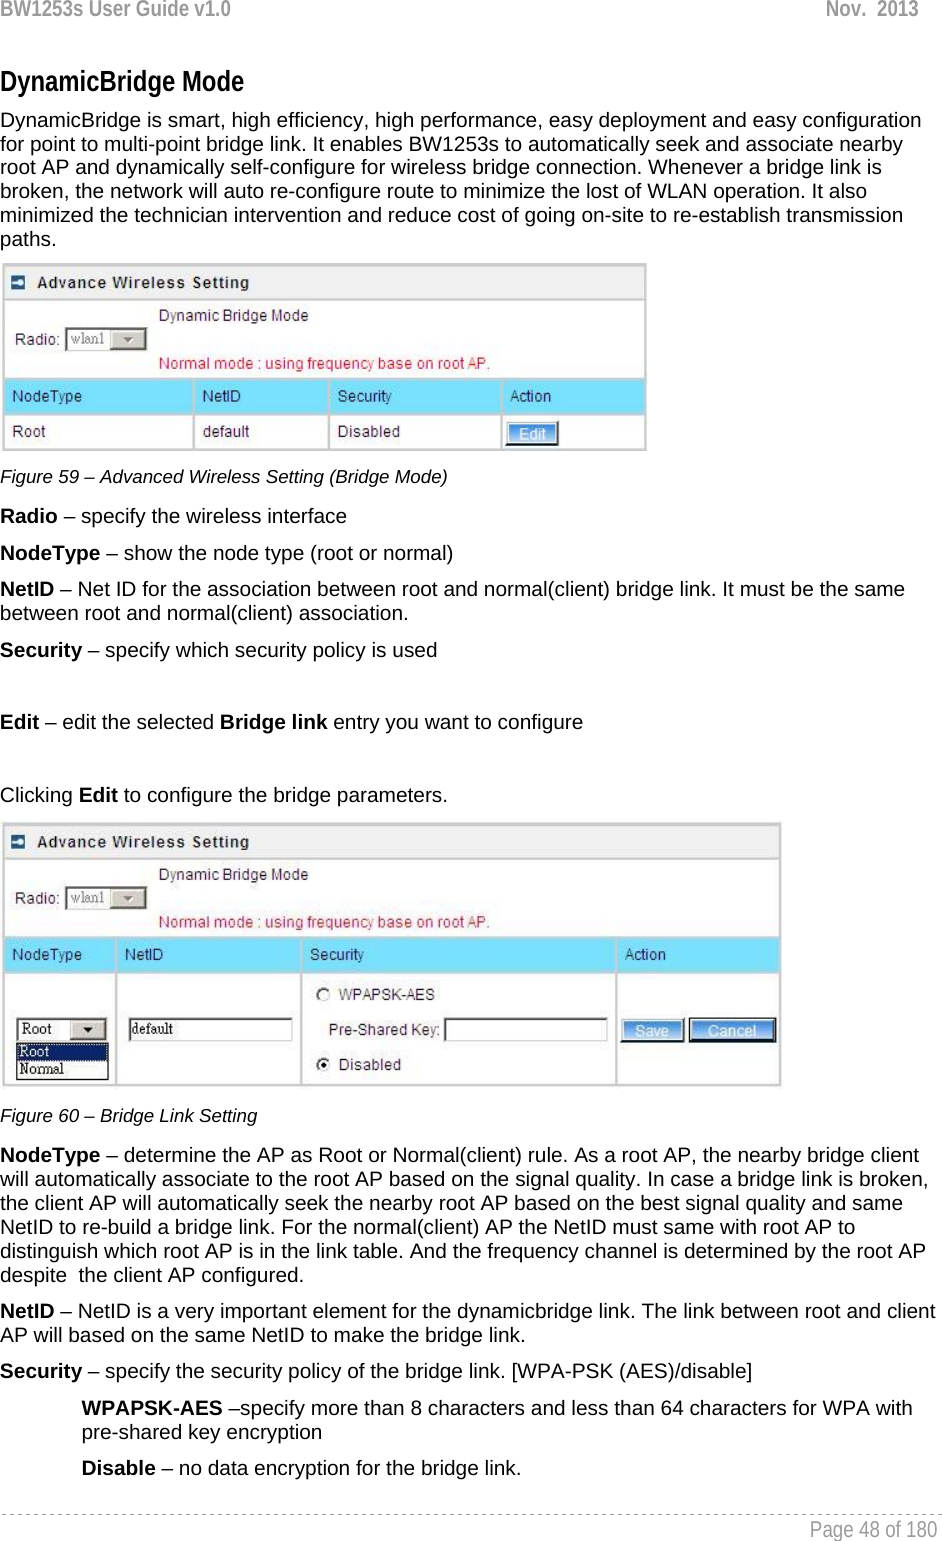 BW1253s User Guide v1.0  Nov.  2013     Page 48 of 180   DynamicBridge Mode DynamicBridge is smart, high efficiency, high performance, easy deployment and easy configuration for point to multi-point bridge link. It enables BW1253s to automatically seek and associate nearby root AP and dynamically self-configure for wireless bridge connection. Whenever a bridge link is broken, the network will auto re-configure route to minimize the lost of WLAN operation. It also minimized the technician intervention and reduce cost of going on-site to re-establish transmission paths.  Figure 59 – Advanced Wireless Setting (Bridge Mode) Radio – specify the wireless interface NodeType – show the node type (root or normal) NetID – Net ID for the association between root and normal(client) bridge link. It must be the same between root and normal(client) association. Security – specify which security policy is used  Edit – edit the selected Bridge link entry you want to configure  Clicking Edit to configure the bridge parameters.  Figure 60 – Bridge Link Setting NodeType – determine the AP as Root or Normal(client) rule. As a root AP, the nearby bridge client will automatically associate to the root AP based on the signal quality. In case a bridge link is broken, the client AP will automatically seek the nearby root AP based on the best signal quality and same NetID to re-build a bridge link. For the normal(client) AP the NetID must same with root AP to distinguish which root AP is in the link table. And the frequency channel is determined by the root AP despite  the client AP configured. NetID – NetID is a very important element for the dynamicbridge link. The link between root and client AP will based on the same NetID to make the bridge link. Security – specify the security policy of the bridge link. [WPA-PSK (AES)/disable]  WPAPSK-AES –specify more than 8 characters and less than 64 characters for WPA with pre-shared key encryption Disable – no data encryption for the bridge link. 